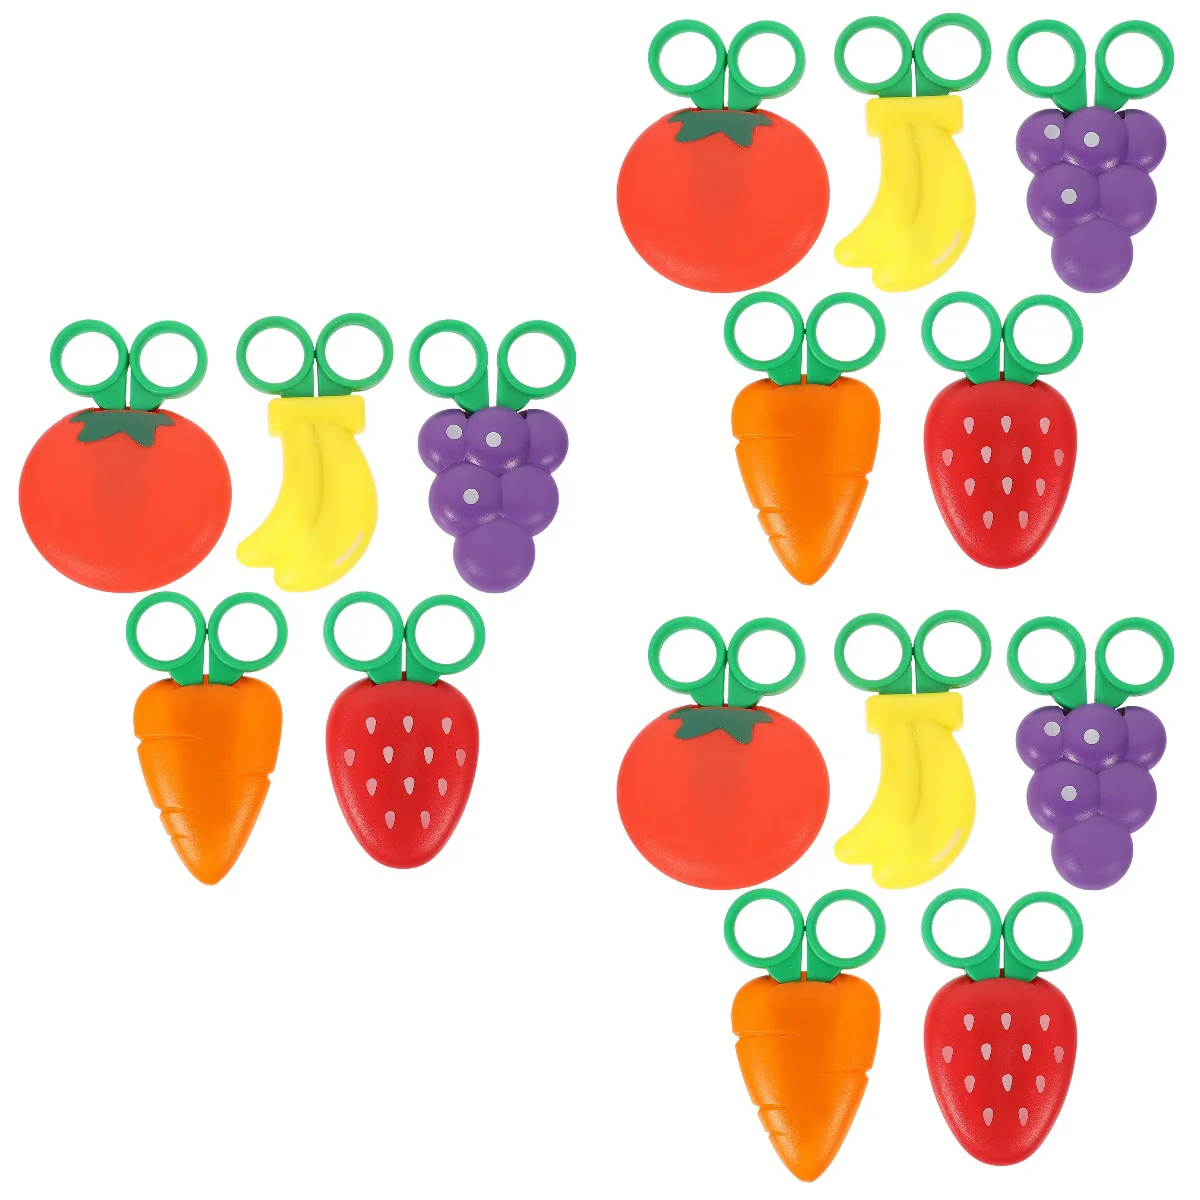 https://ae01.alicdn.com/kf/Sc933ed8ea525473a9ea035ffe6fb22e85/15-Pcs-Fruit-Shape-Scissors-Magnets-For-Kids-Classroom-Paper-Whiteboard-Safety-Ages-3-5-Stainless.jpg